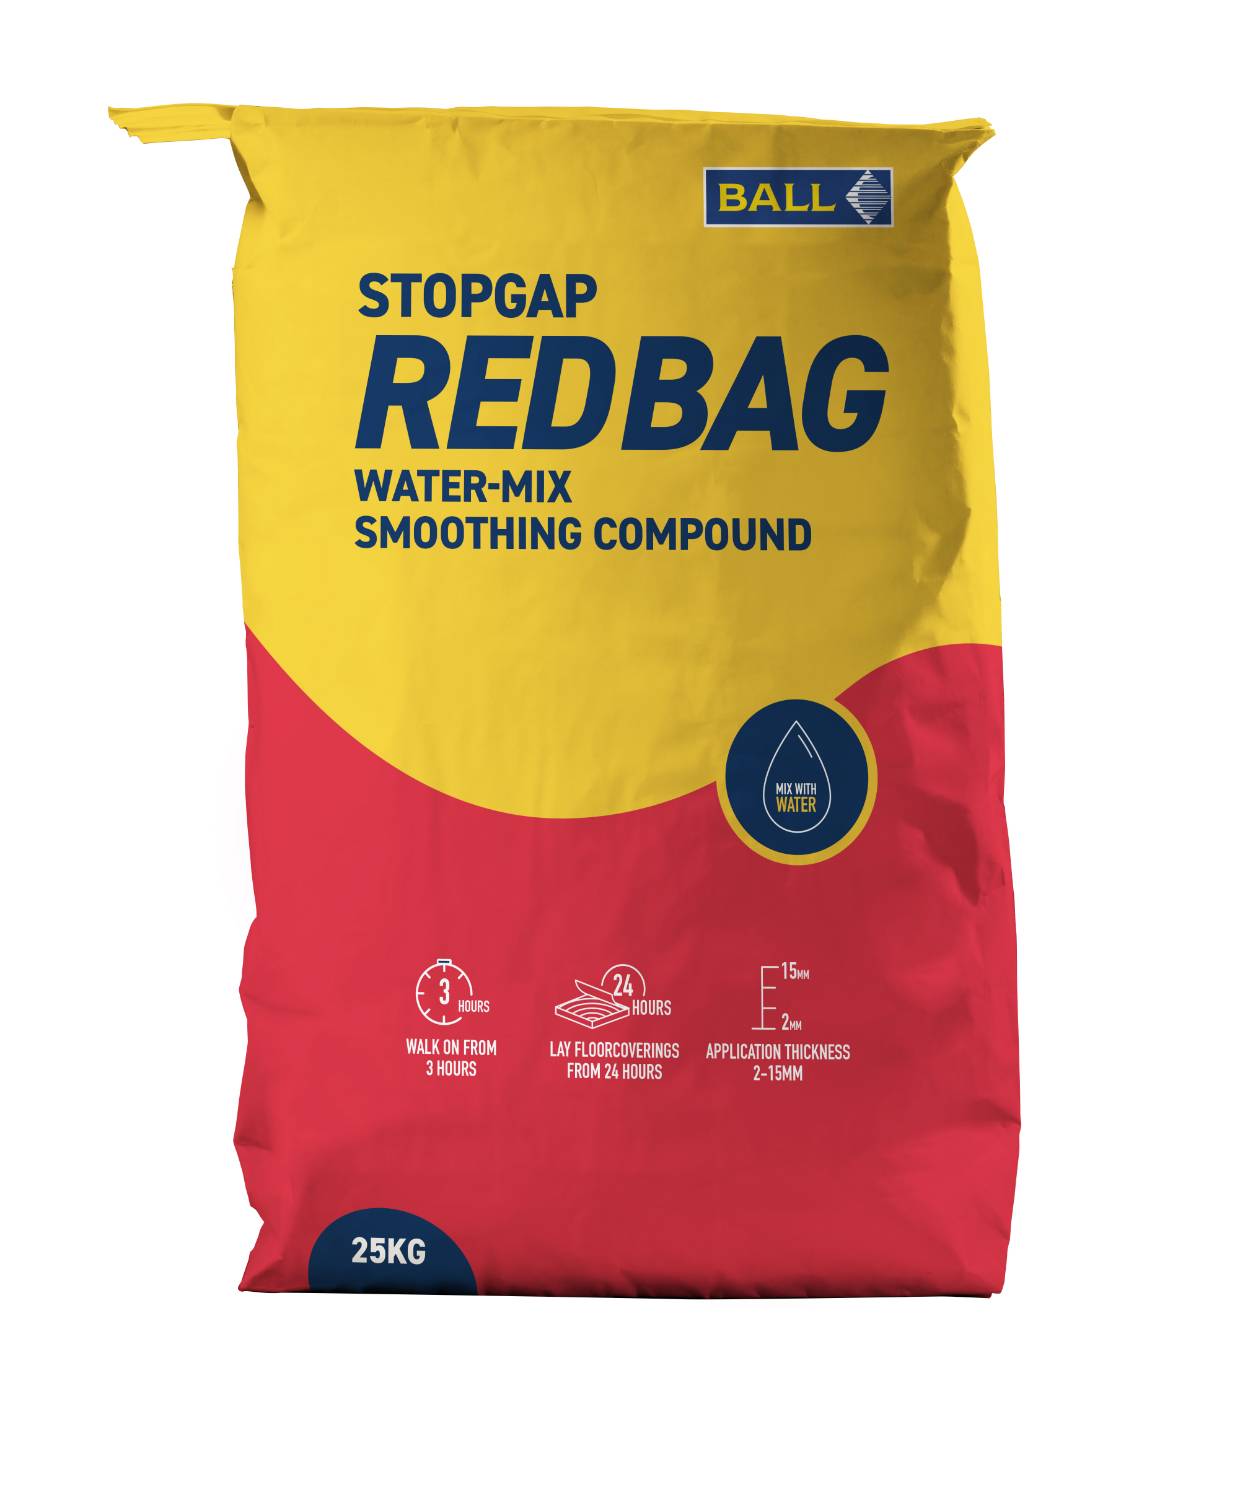 Stopgap Red Bag - Smoothing Compound